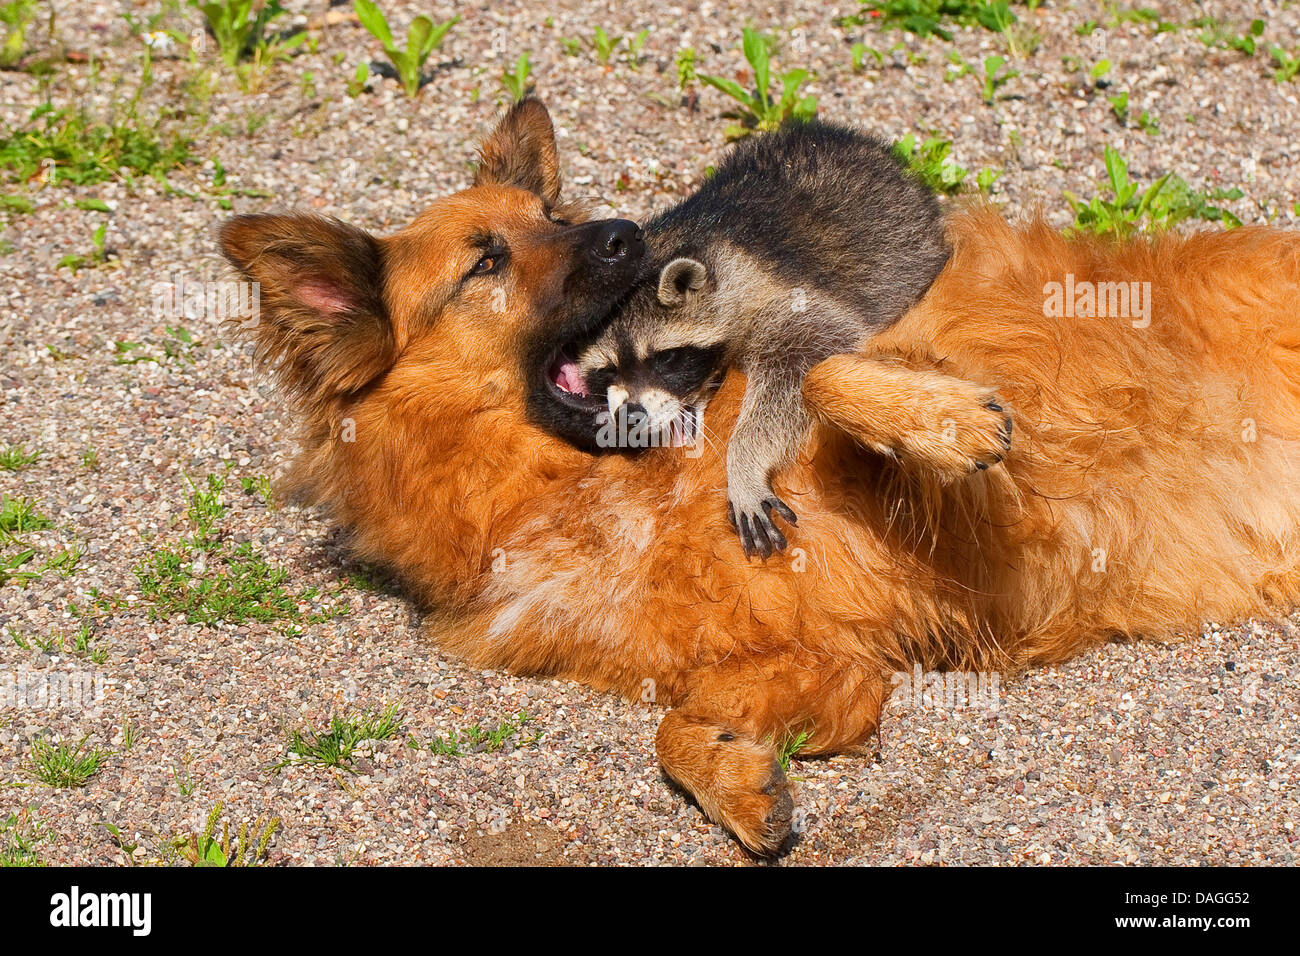 common raccoon (Procyon lotor), hand-raised juvenile raccoon playing with dog, Germany Stock Photo